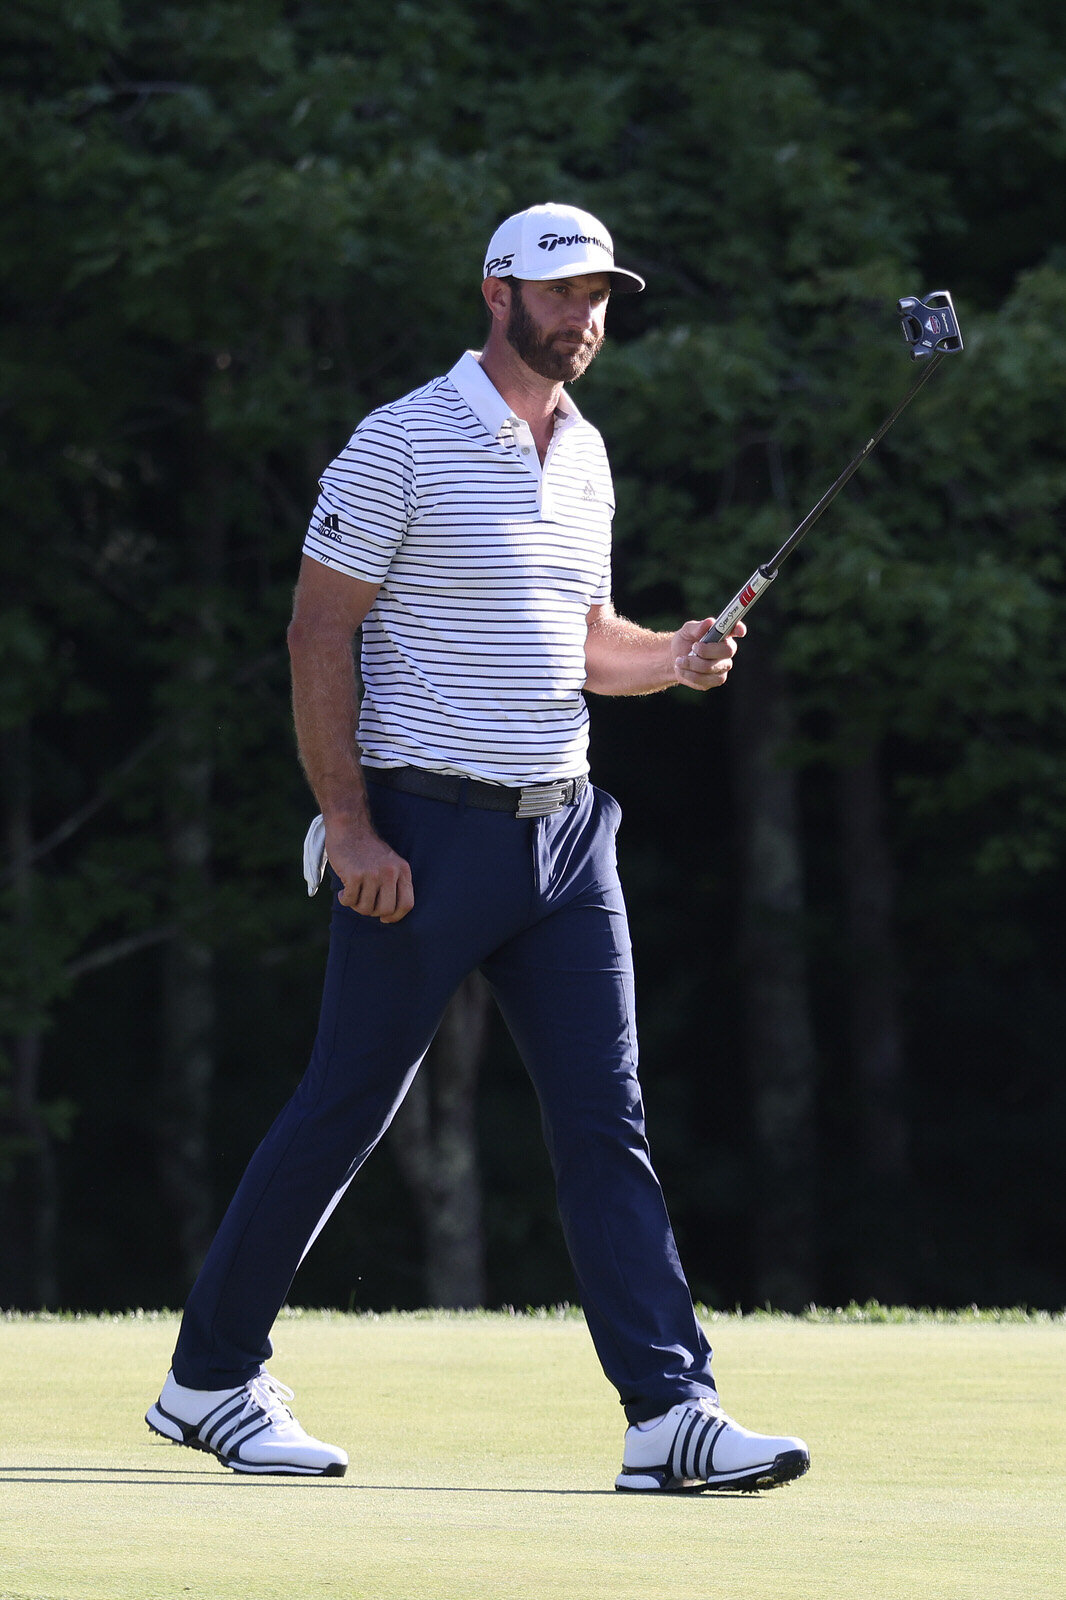  NORTON, MASSACHUSETTS - AUGUST 21: Dustin Johnson of the United States reacts after putting on the 18th hole to finish the day with a 60 during the second round of The Northern Trust at TPC Boston on August 21, 2020 in Norton, Massachusetts. (Photo 